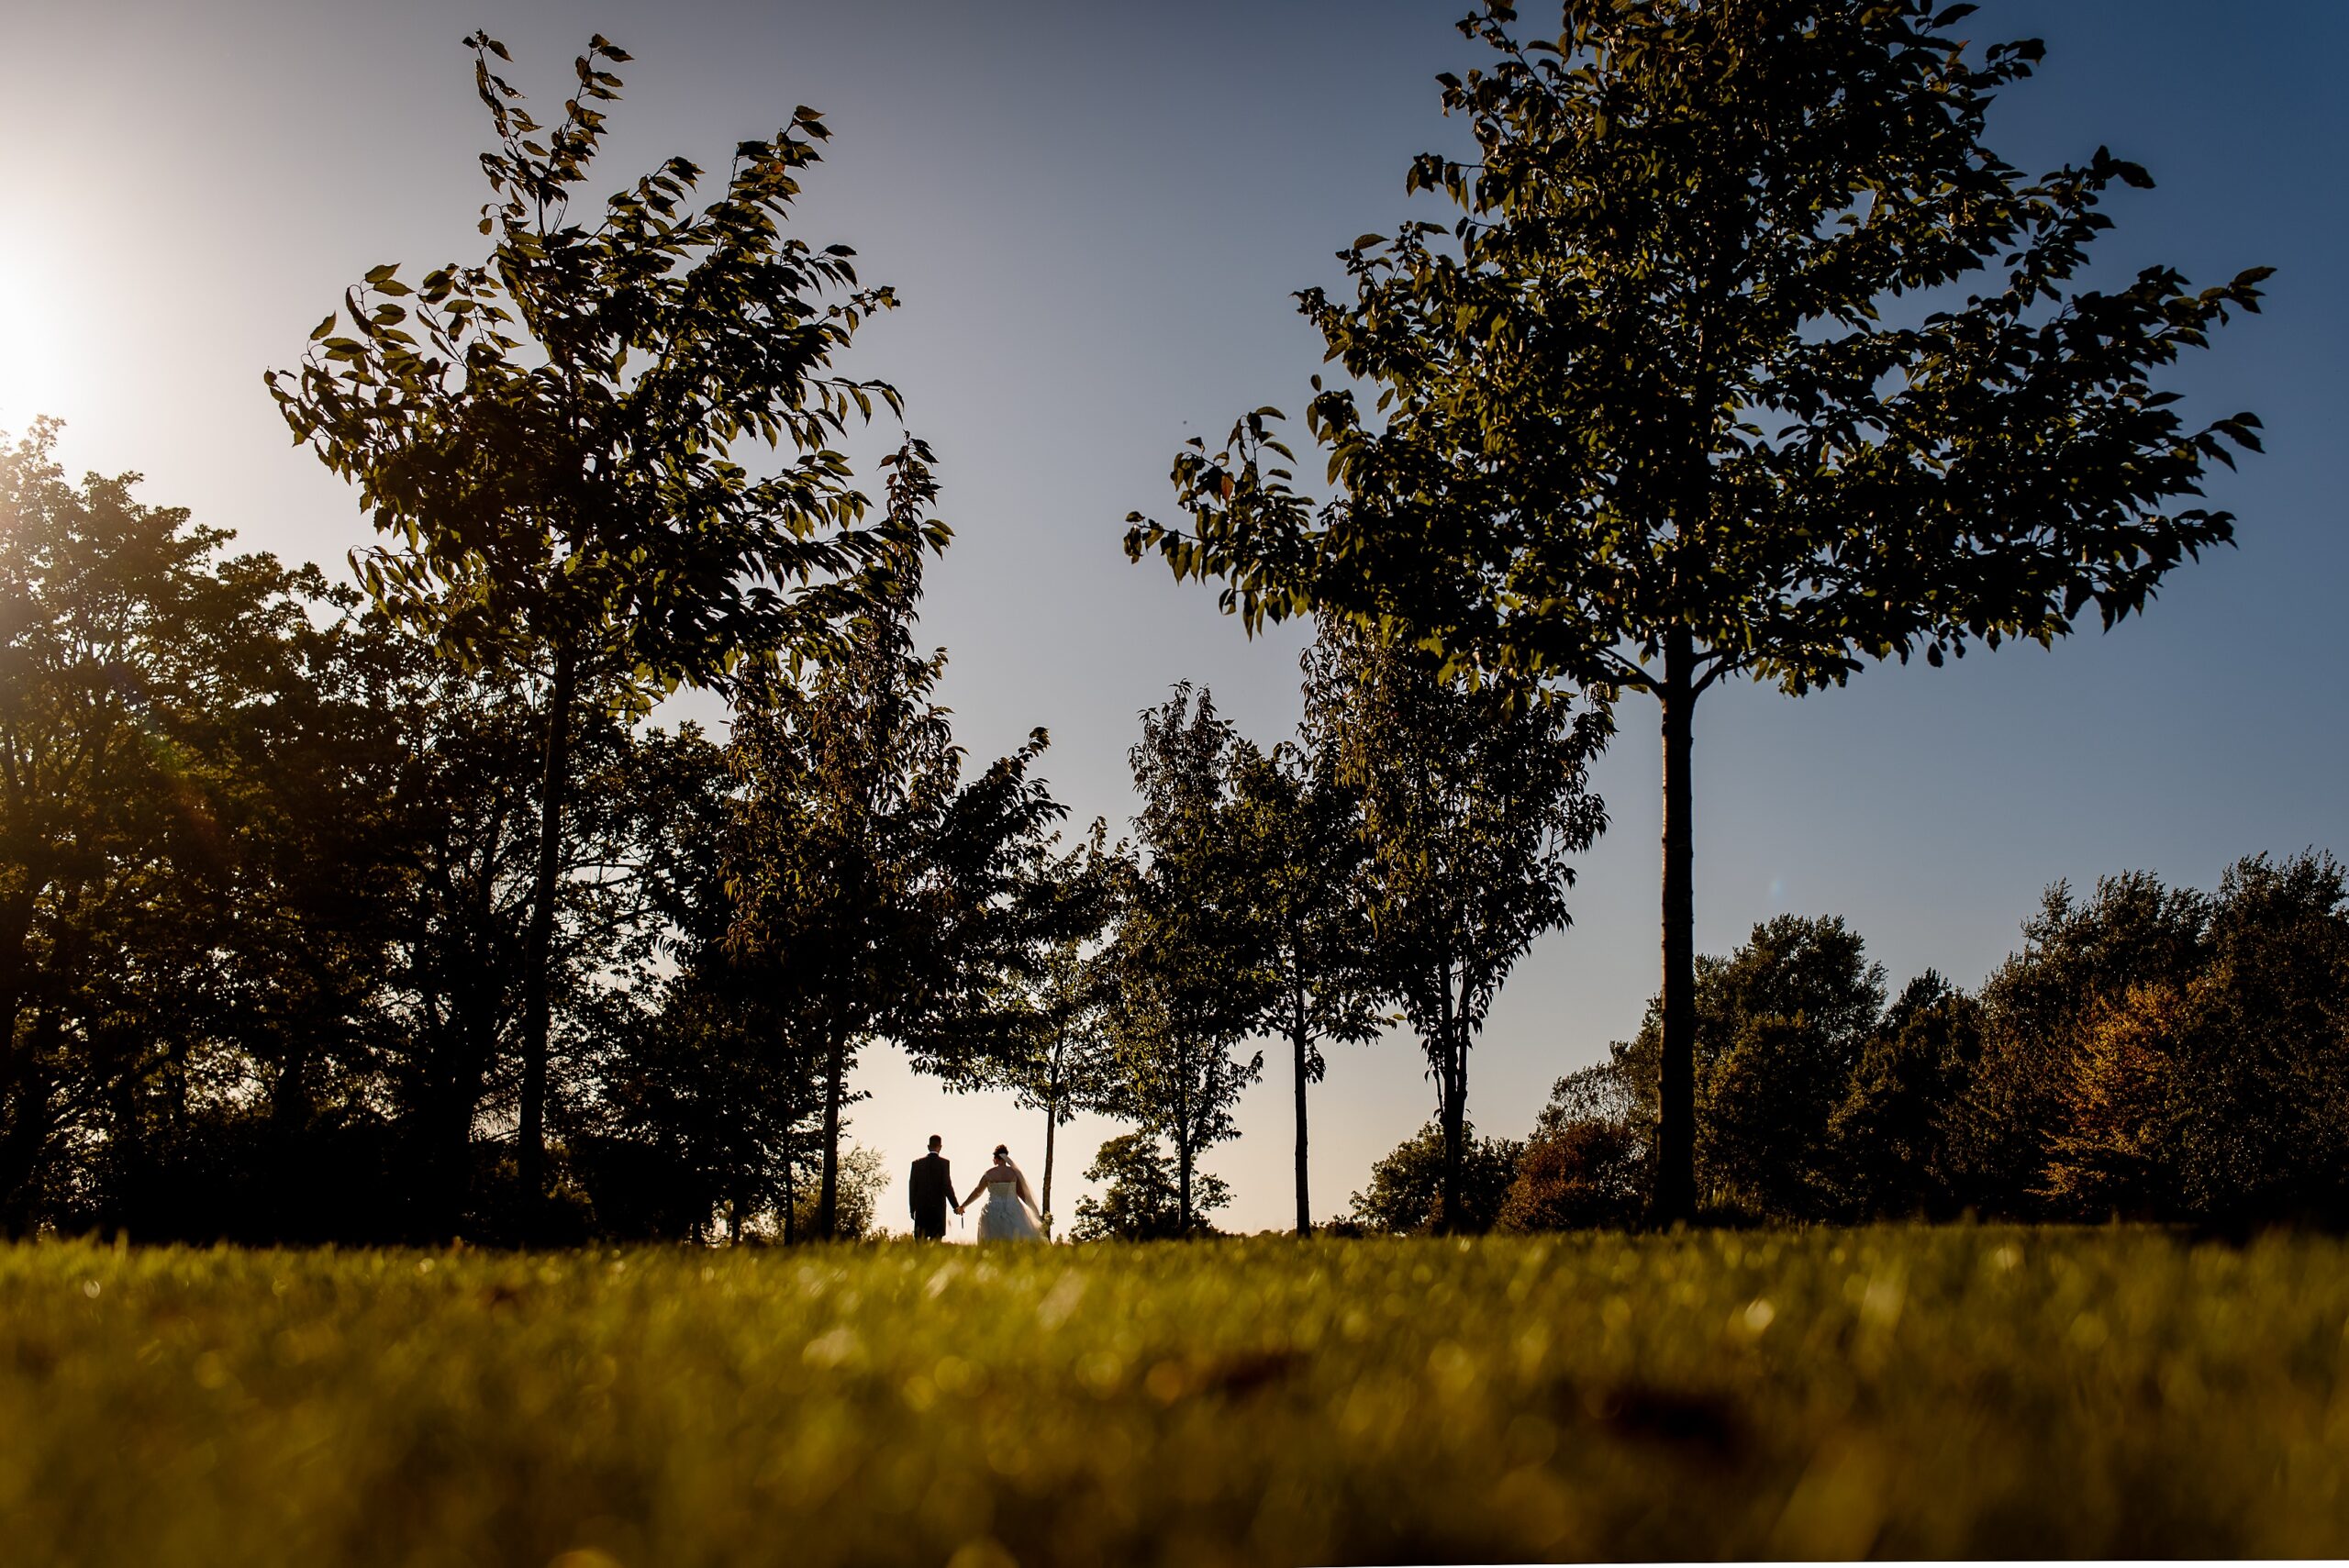 A couple strolling through Laceby Manor, with trees in the background.